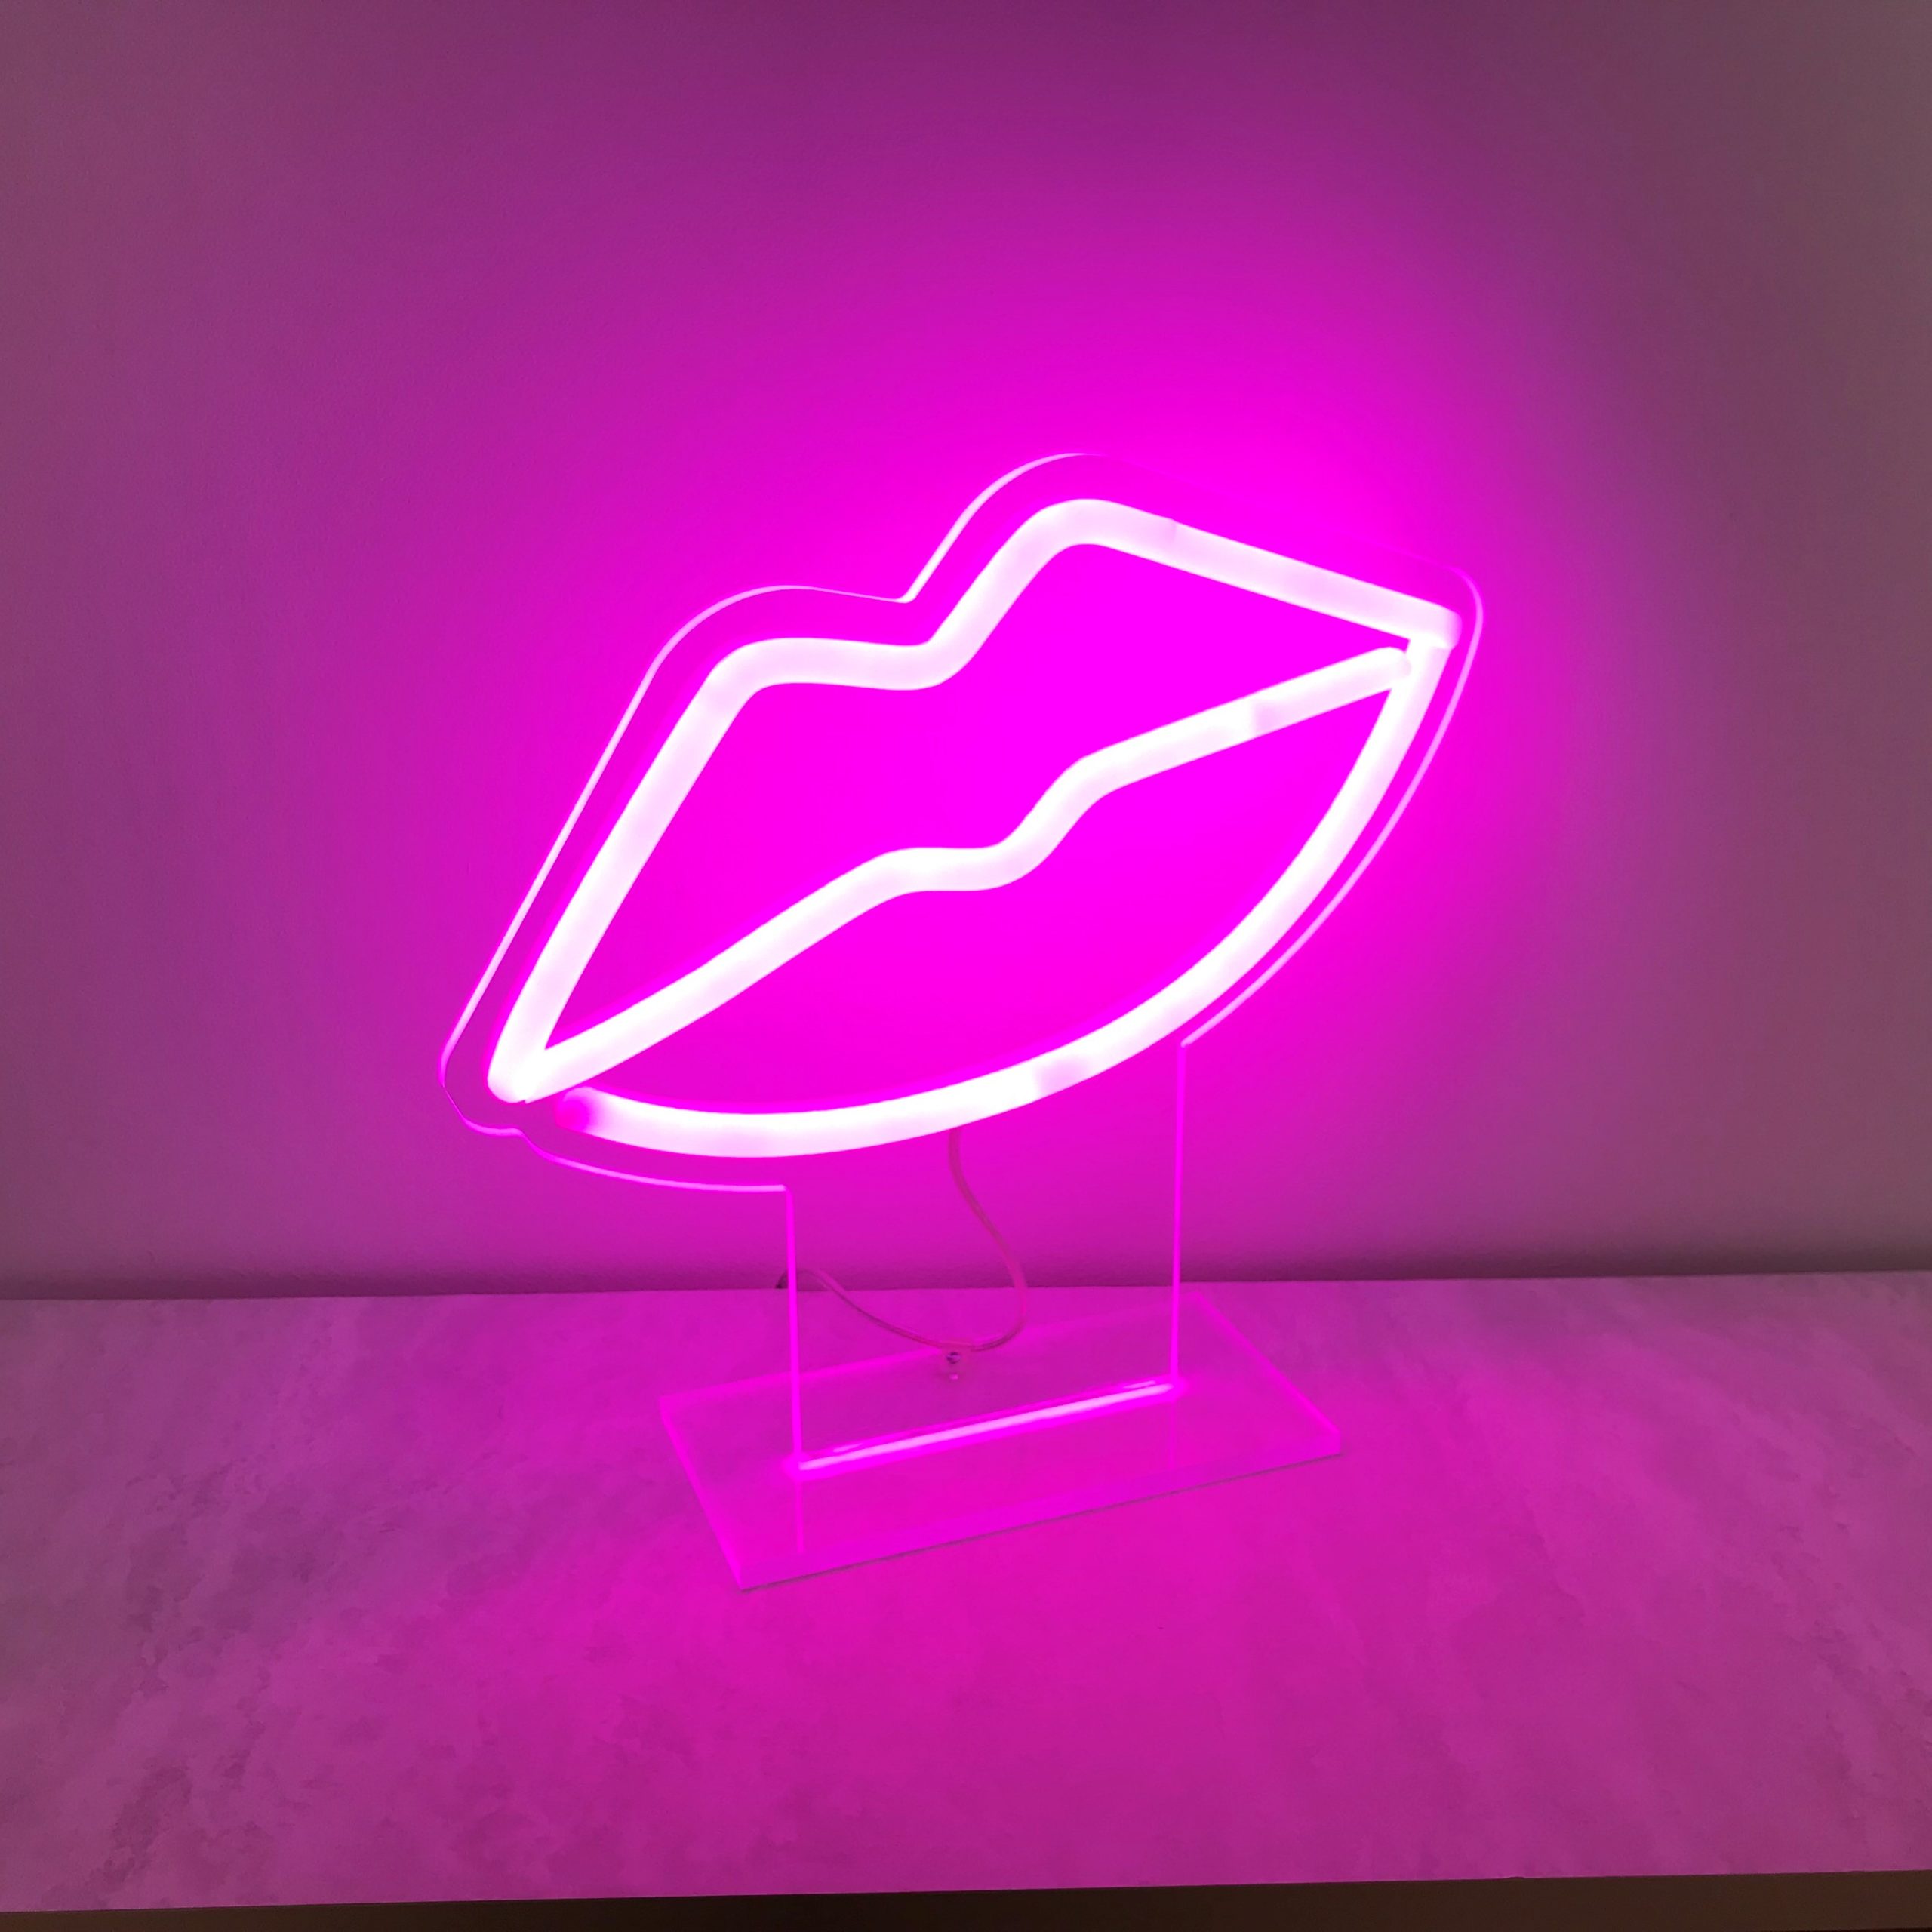 Neon slogan sign for sale | Bespoke neon lights from Neon Works | Lips ...